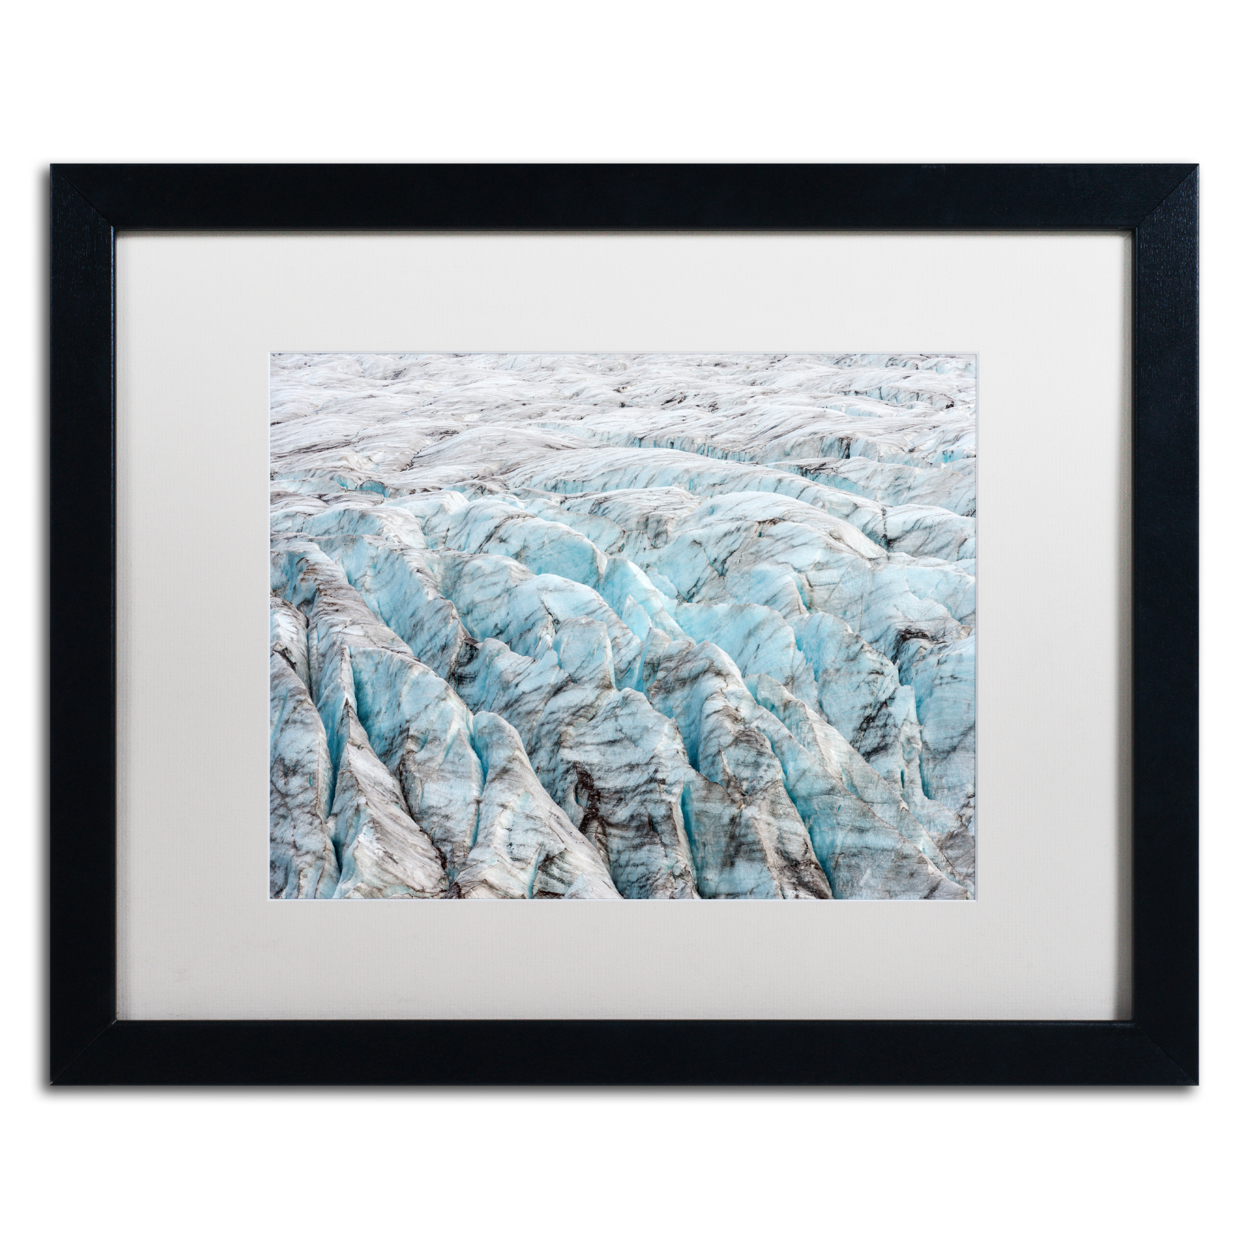 Philippe Sainte-Laudy 'Eternal Ice' Black Wooden Framed Art 18 X 22 Inches